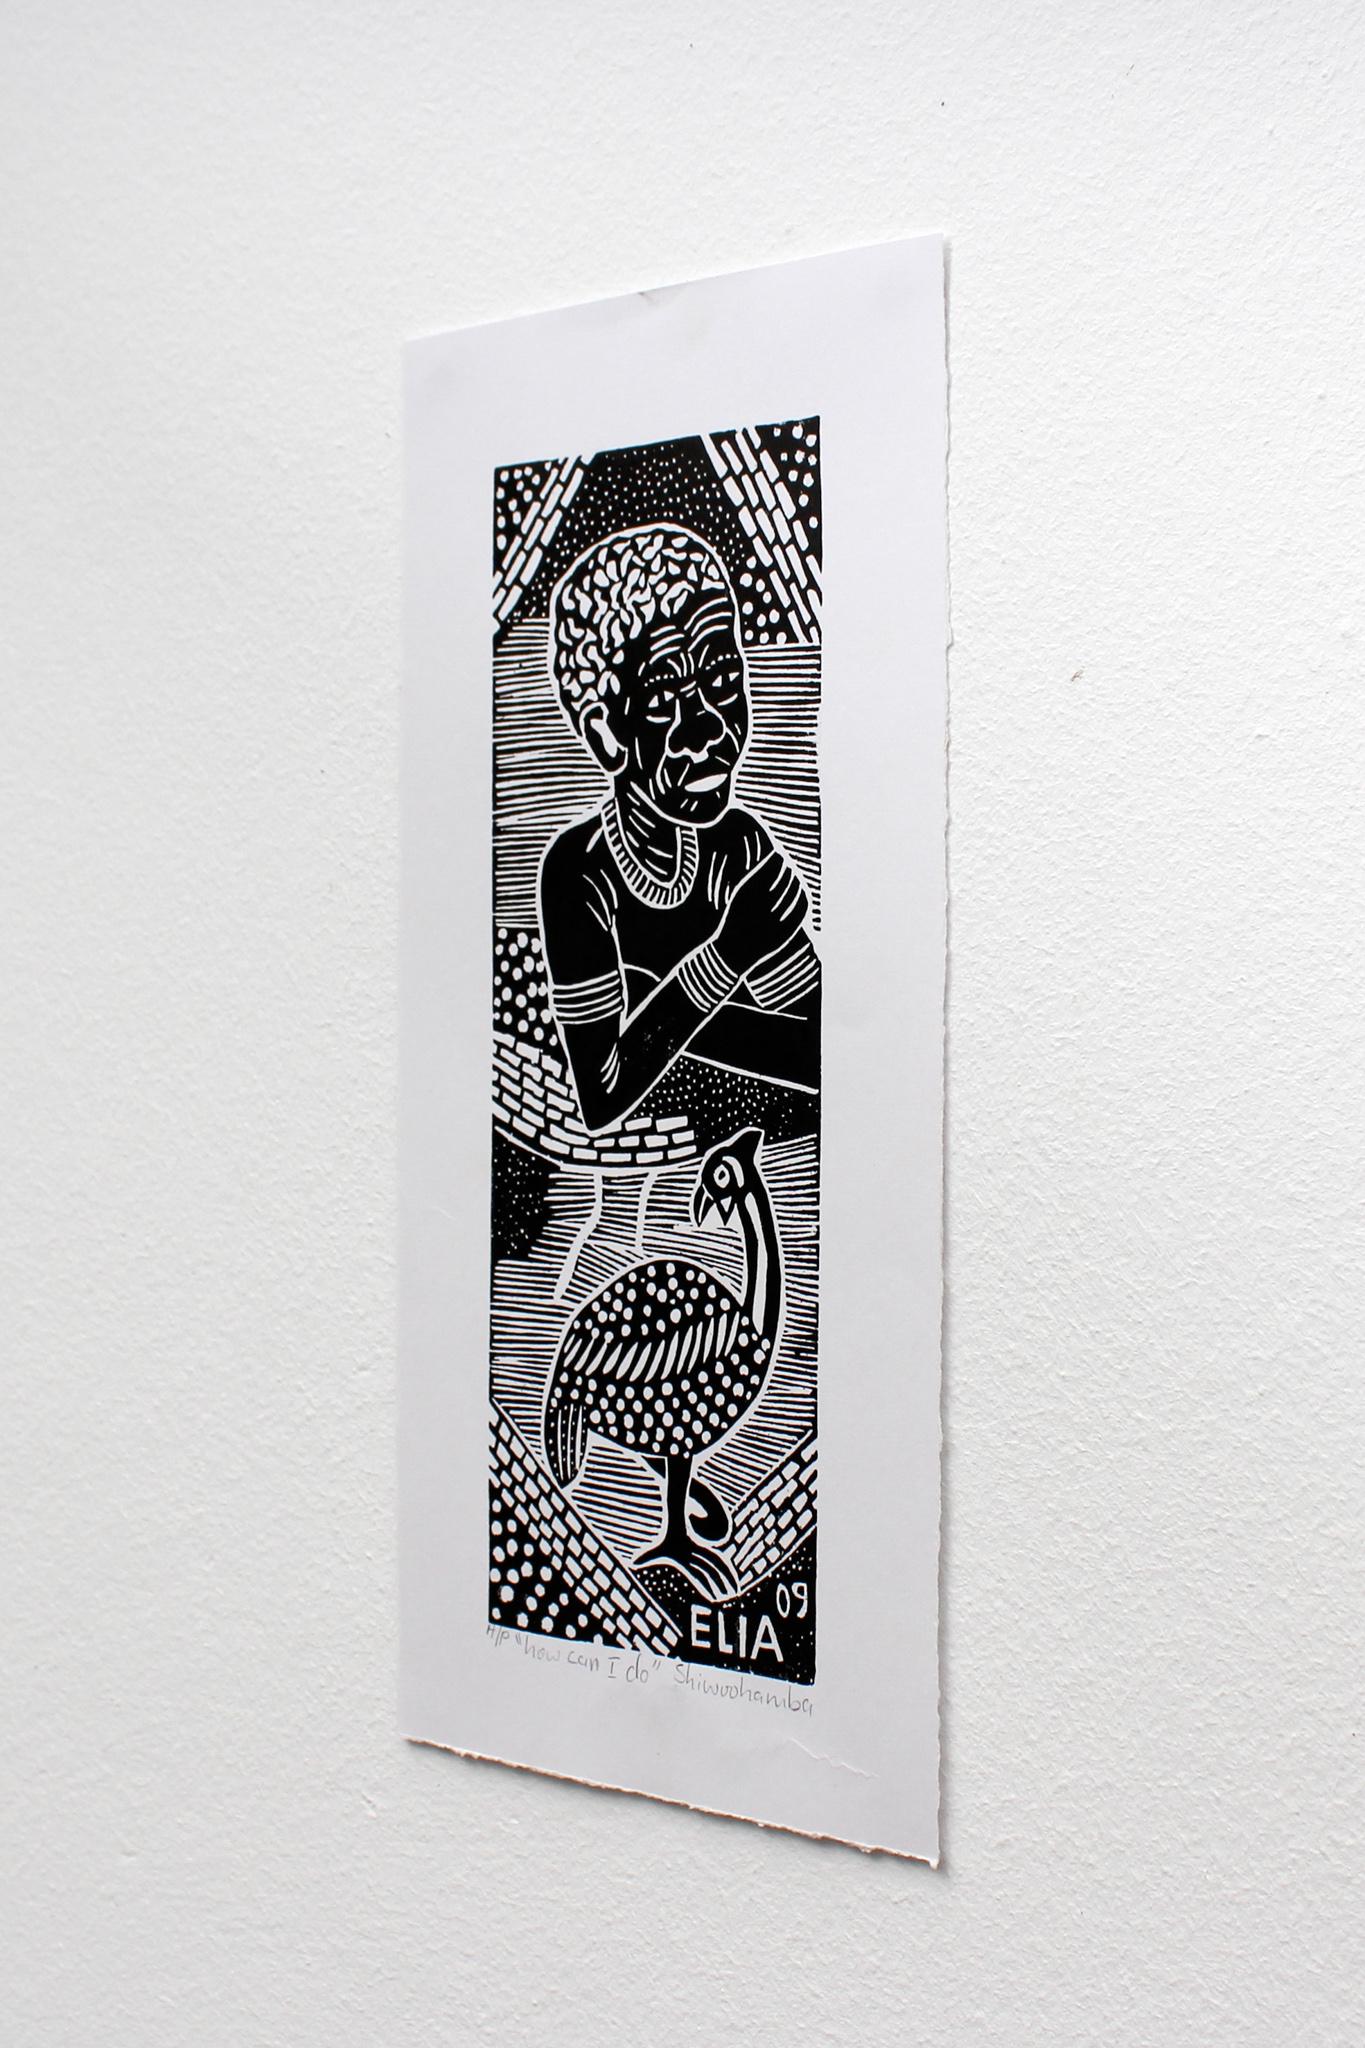 How can I do, 2009. Linoleum block print on paper. Unlimited Edition. 

Elia Shiwoohamba was born in 1981 in Windhoek, Namibia. He graduated from the John Muafangejo Art Centre in Windhoek in 2006. Specialising in printmaking and sculpture,